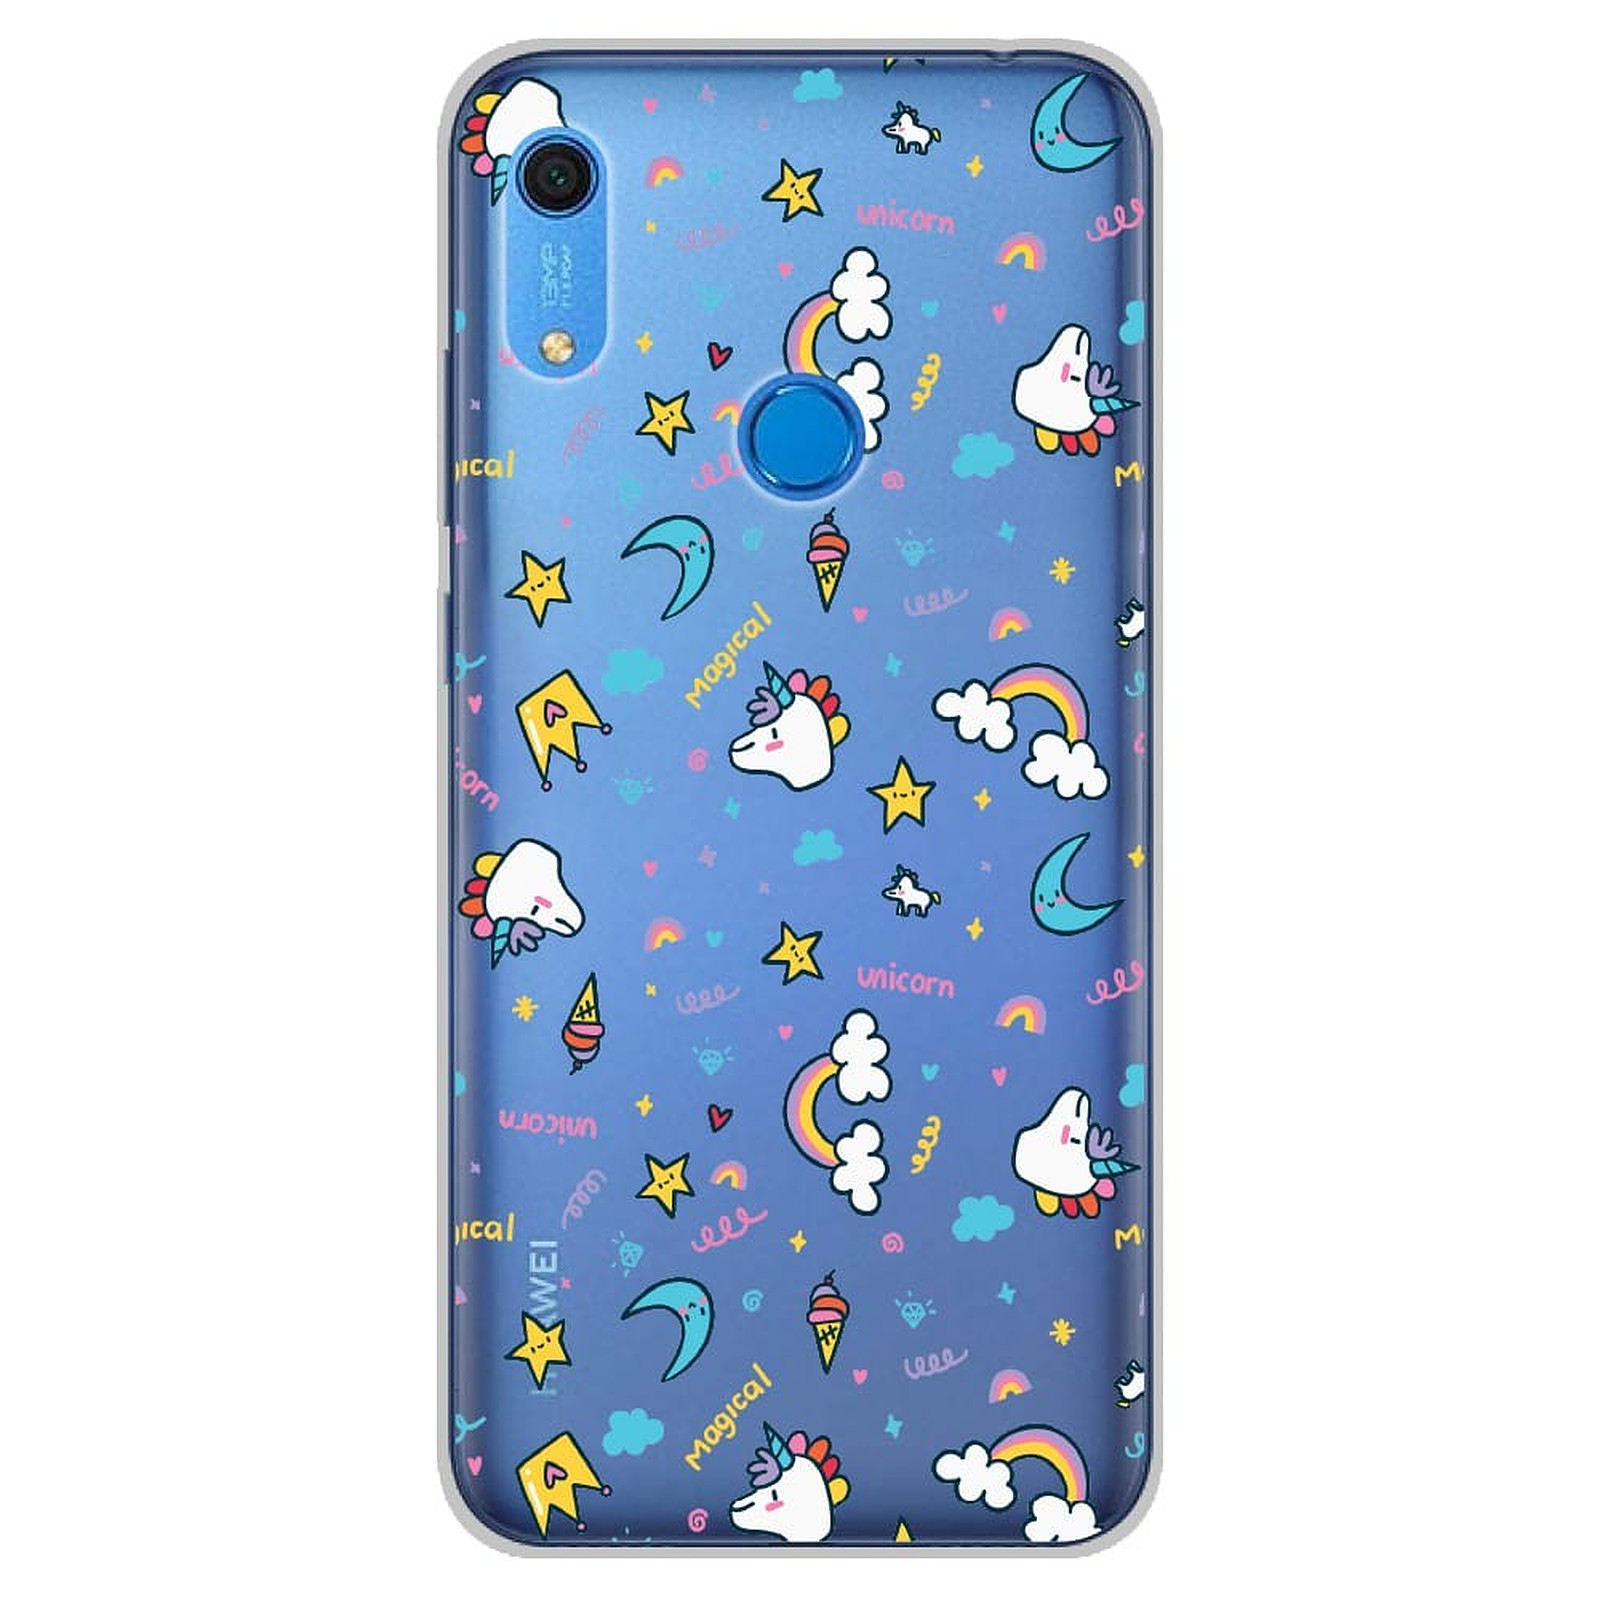 1001 Coques Coque silicone gel Huawei Y6S motif Licorne rainbow - Coque telephone 1001Coques